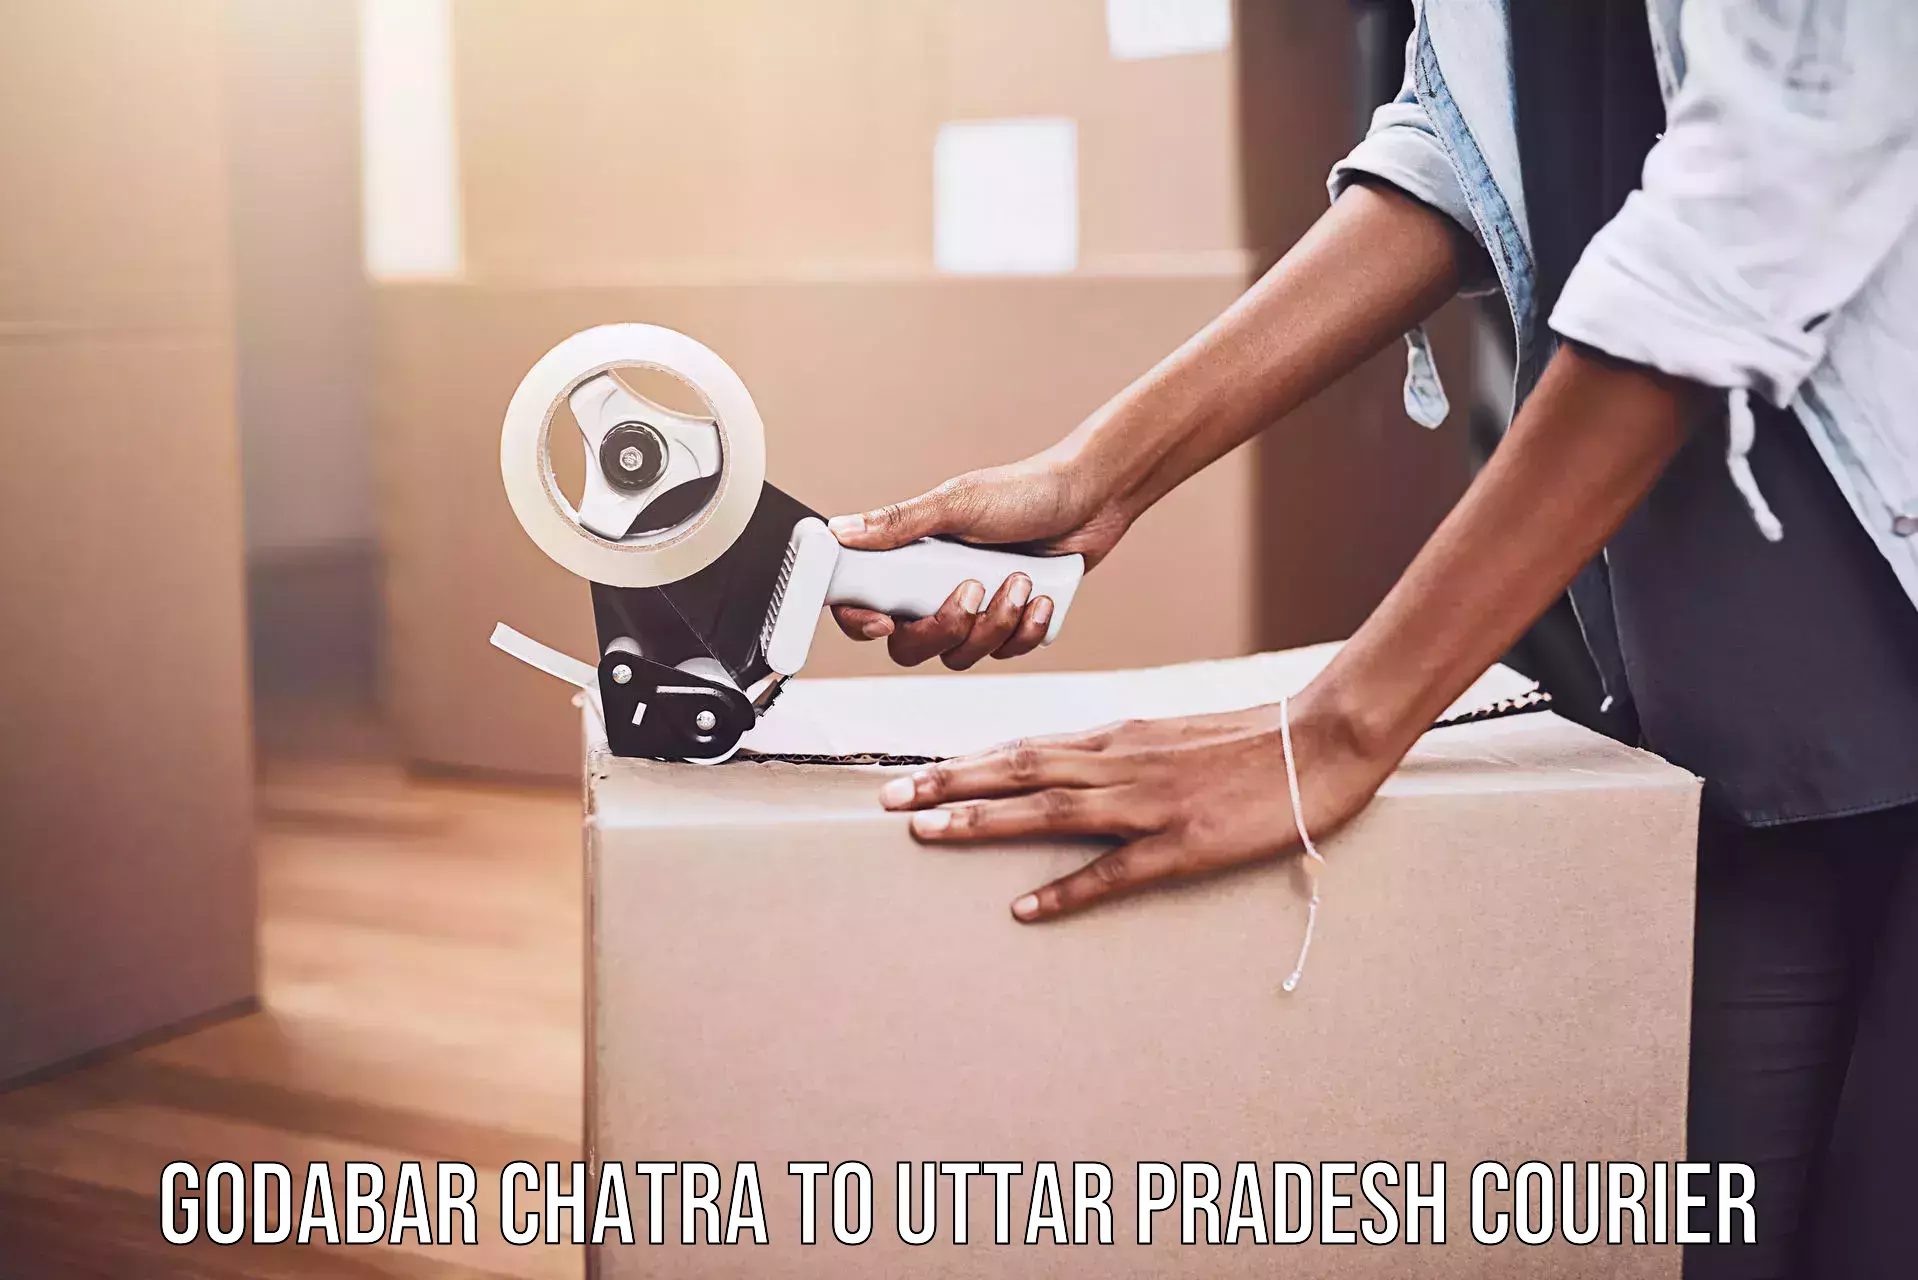 Multi-national courier services Godabar Chatra to Konch